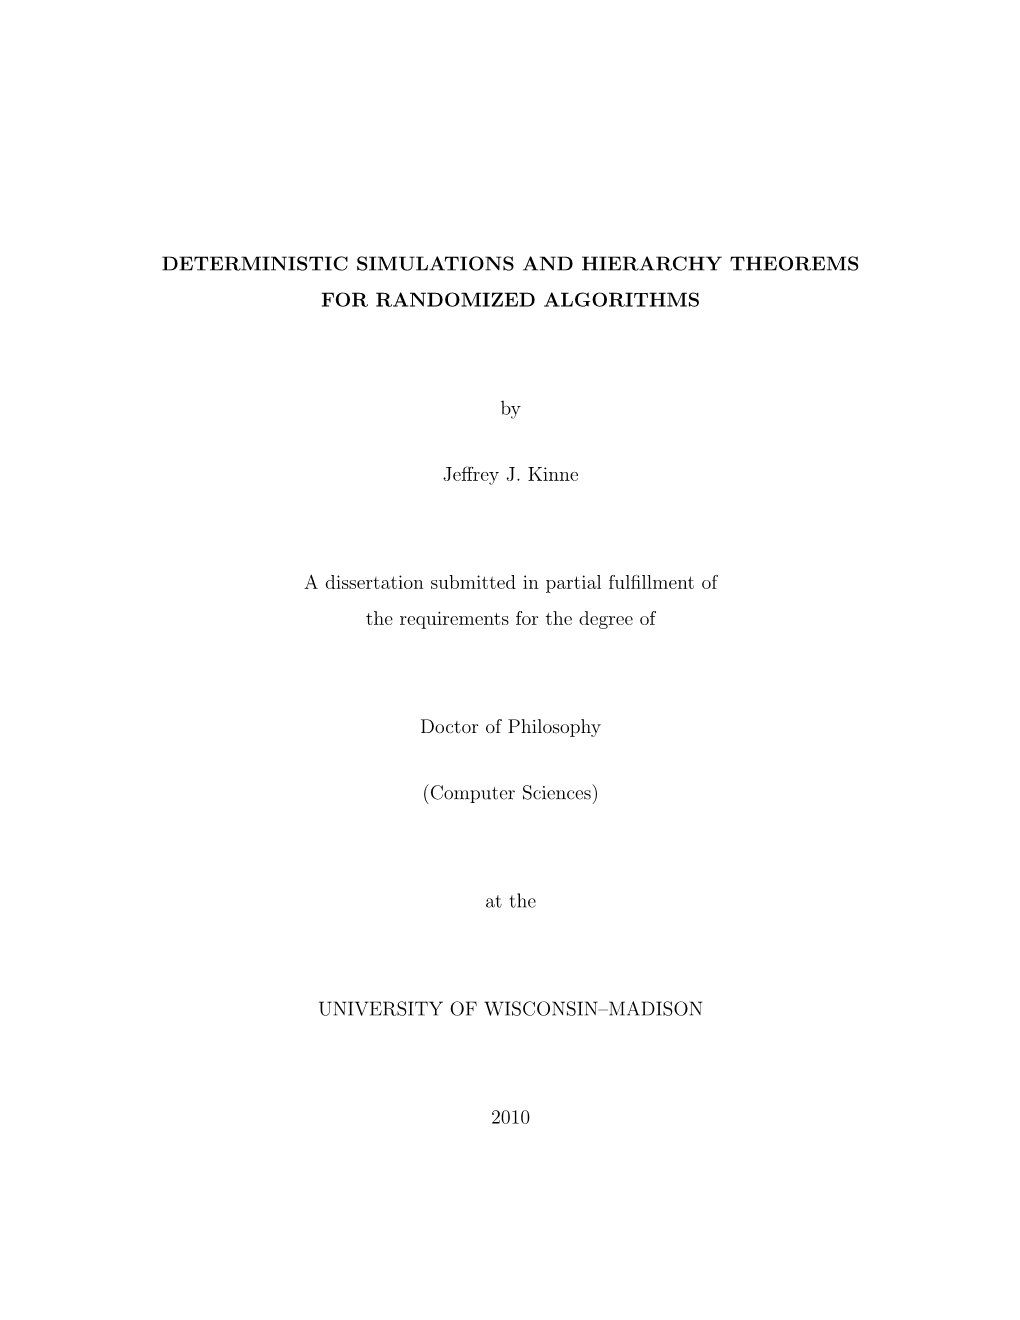 DETERMINISTIC SIMULATIONS and HIERARCHY THEOREMS for RANDOMIZED ALGORITHMS by Jeffrey J. Kinne a Dissertation Submitted in Parti